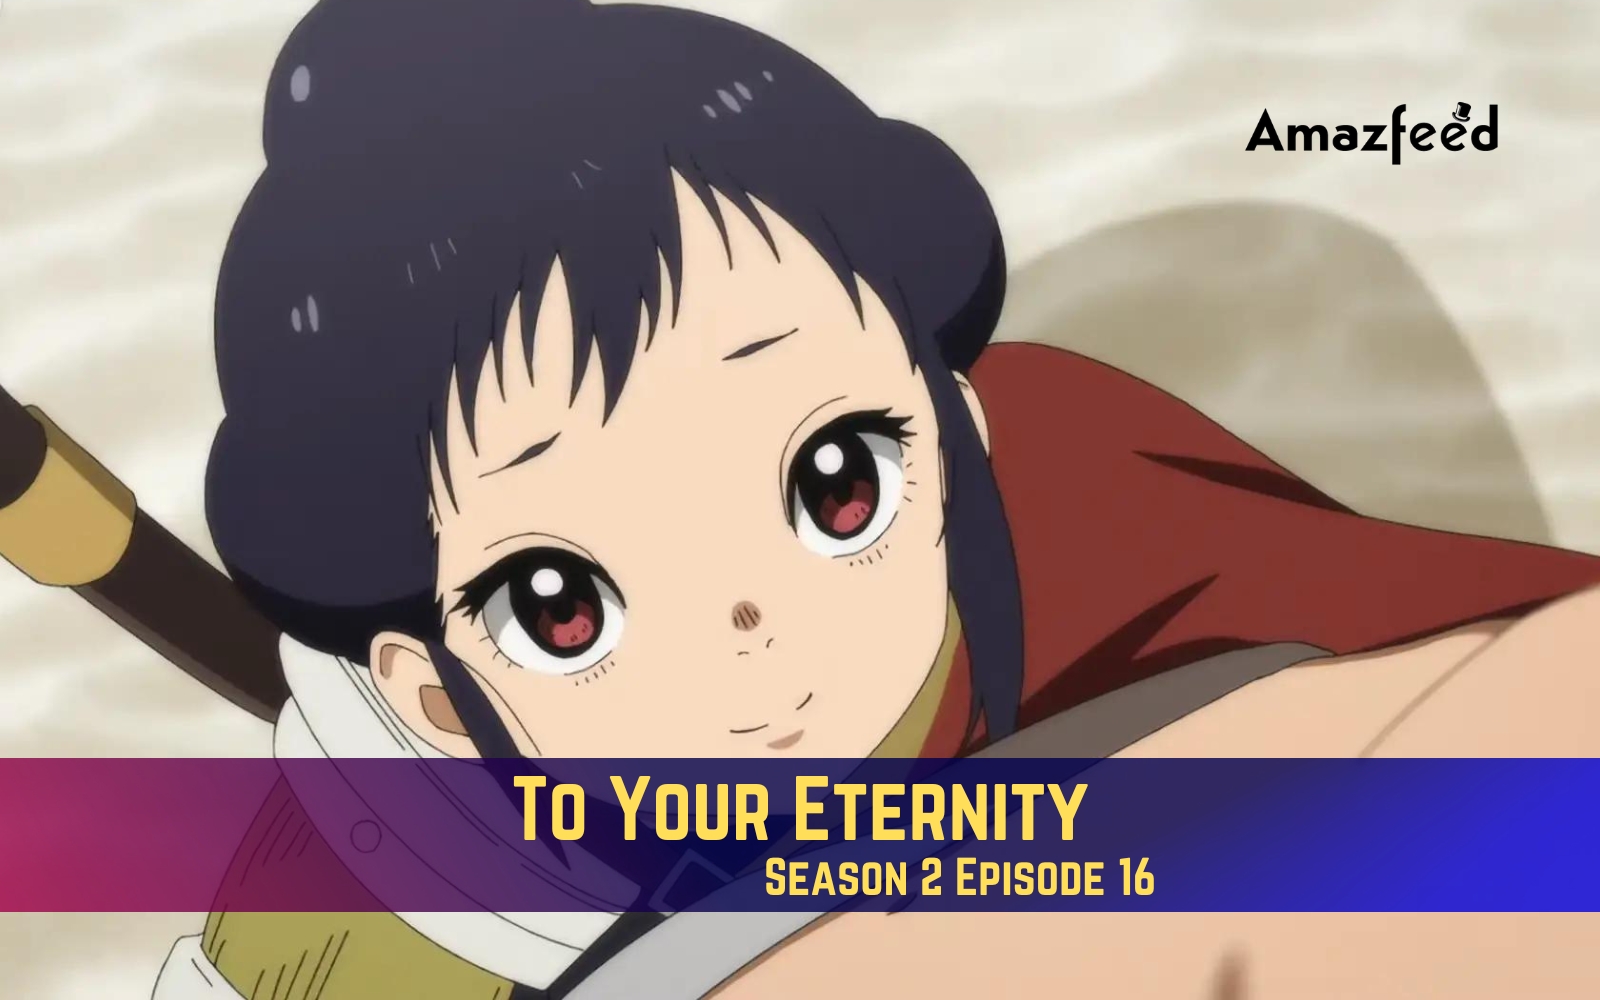 To Your Eternity Episode 16 - Anime Review